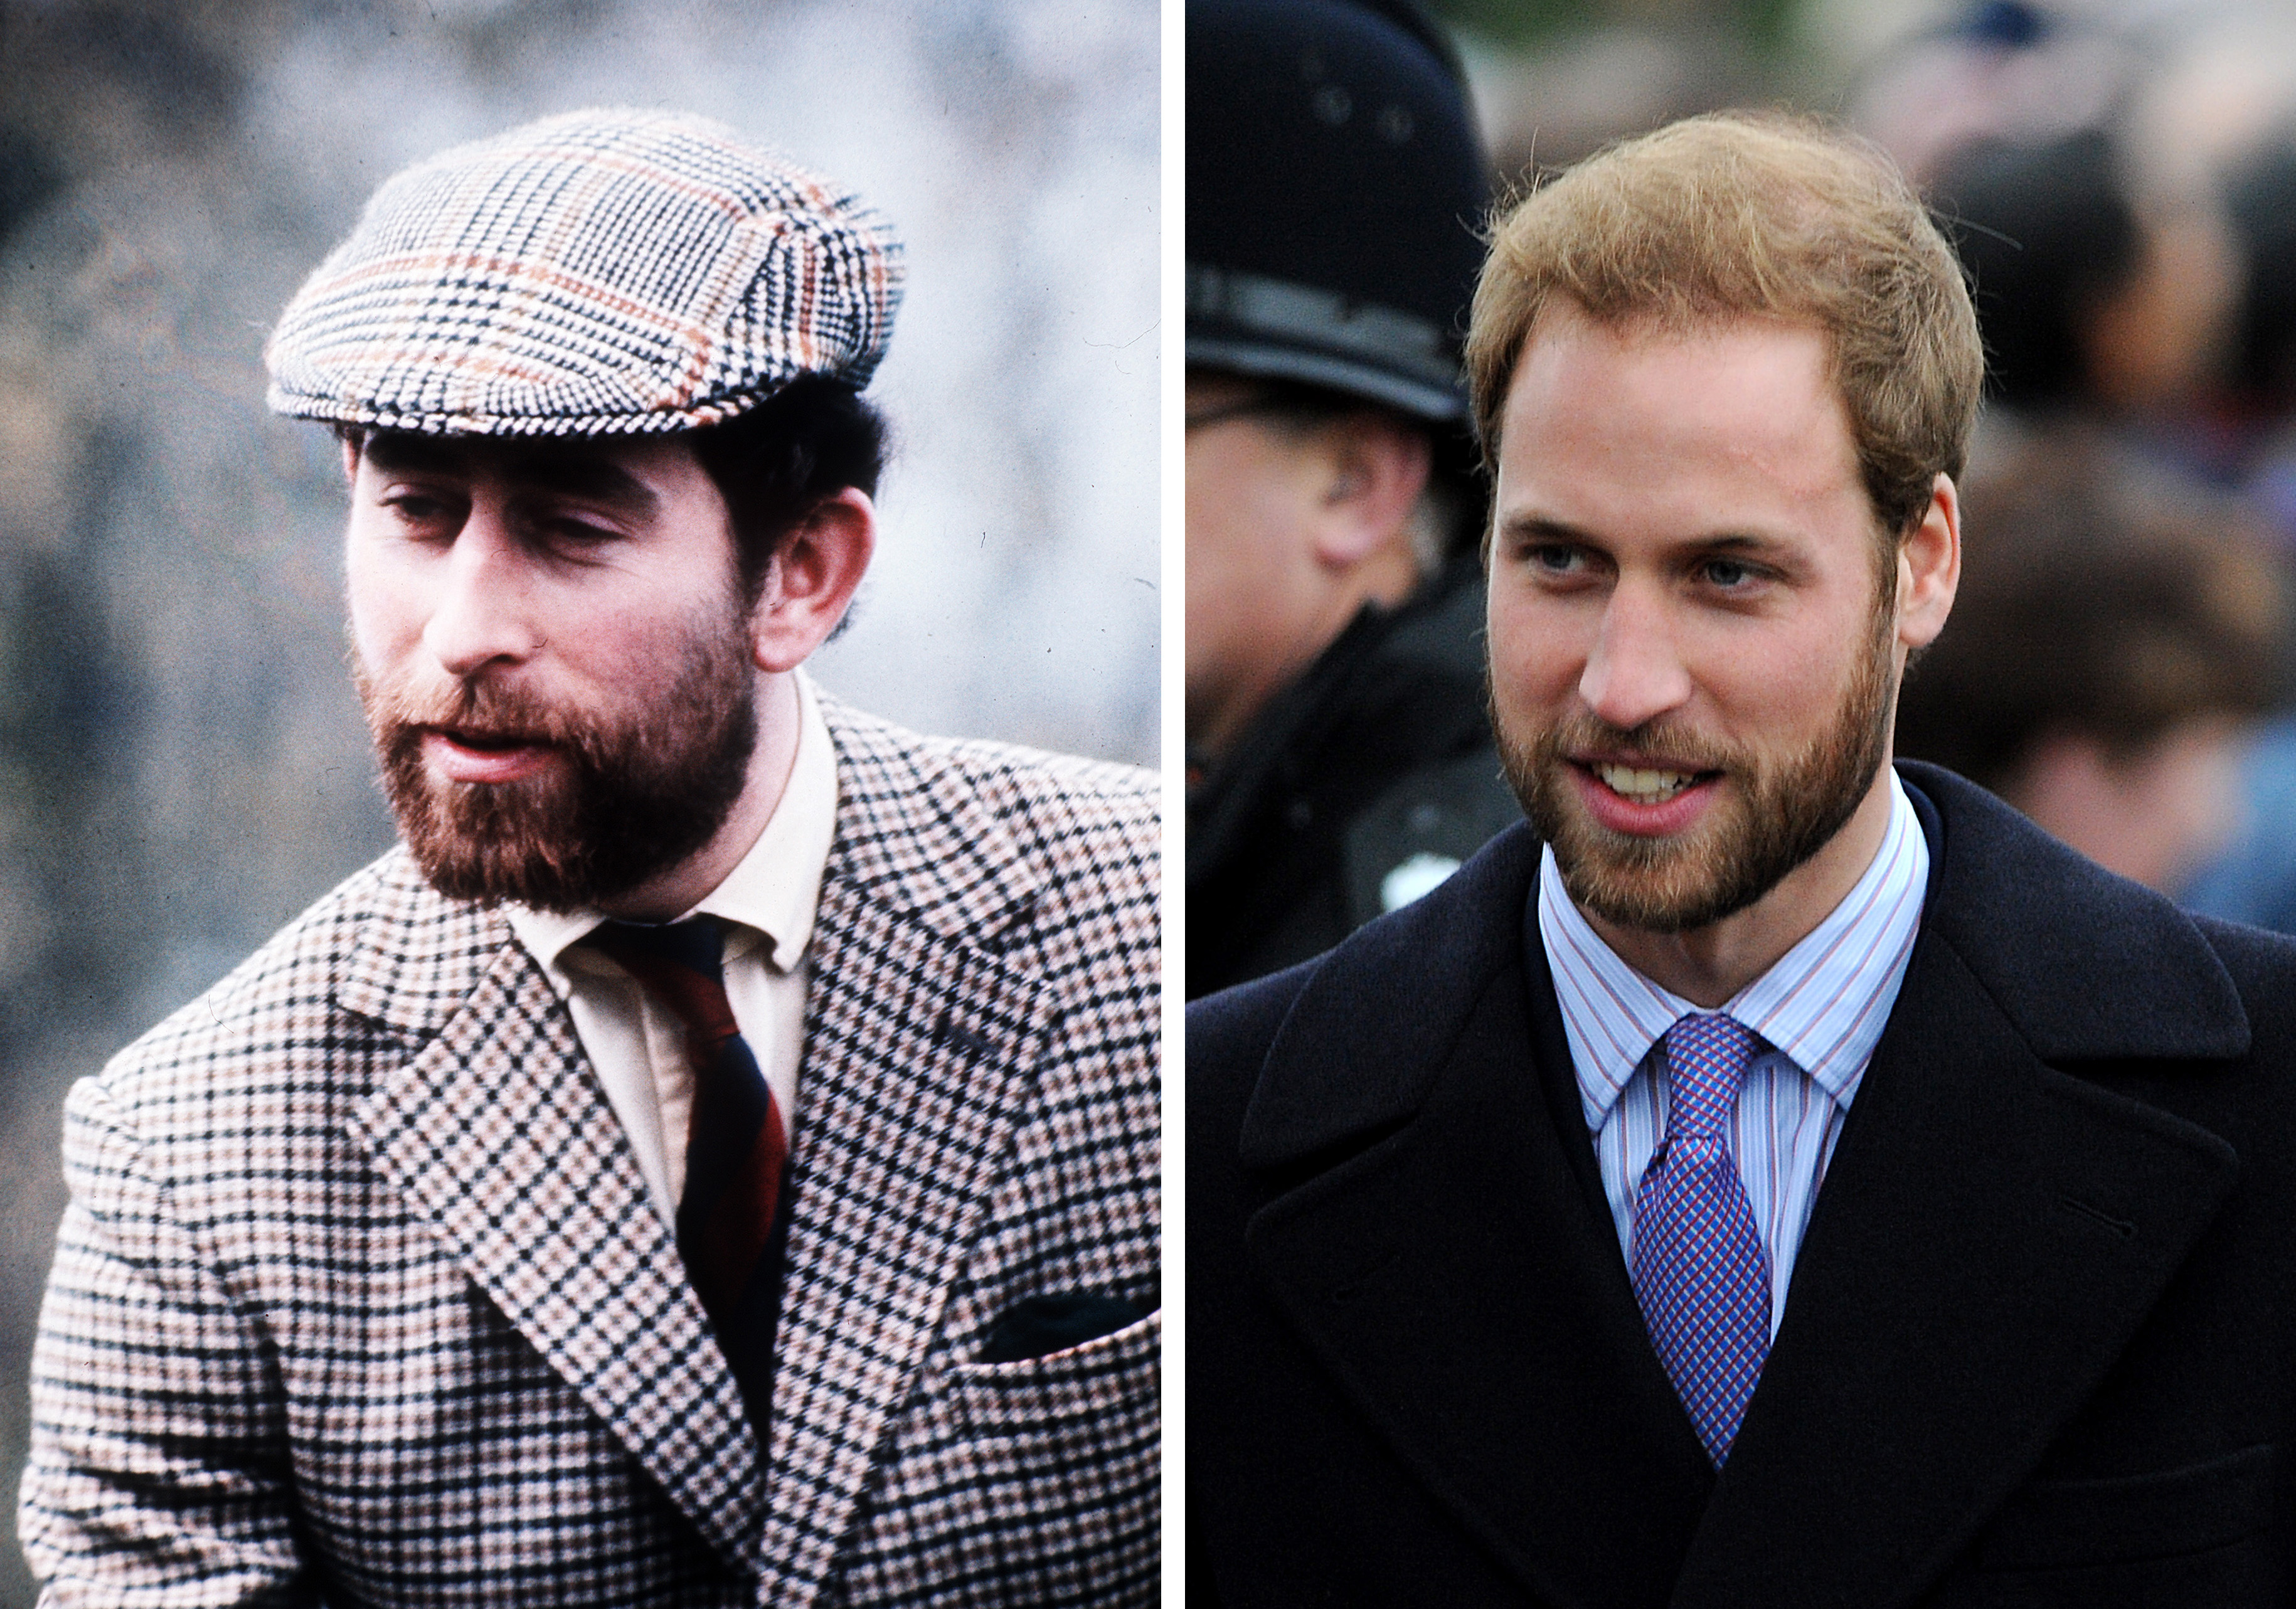 (L) A comparison between King Charles III in 1976 in Badminton, England and Prince William (R) as he attends the Christmas Day service at St Mary Magdelene Church on December 25, 2008 in Sandringham, England. | Source: Getty Images